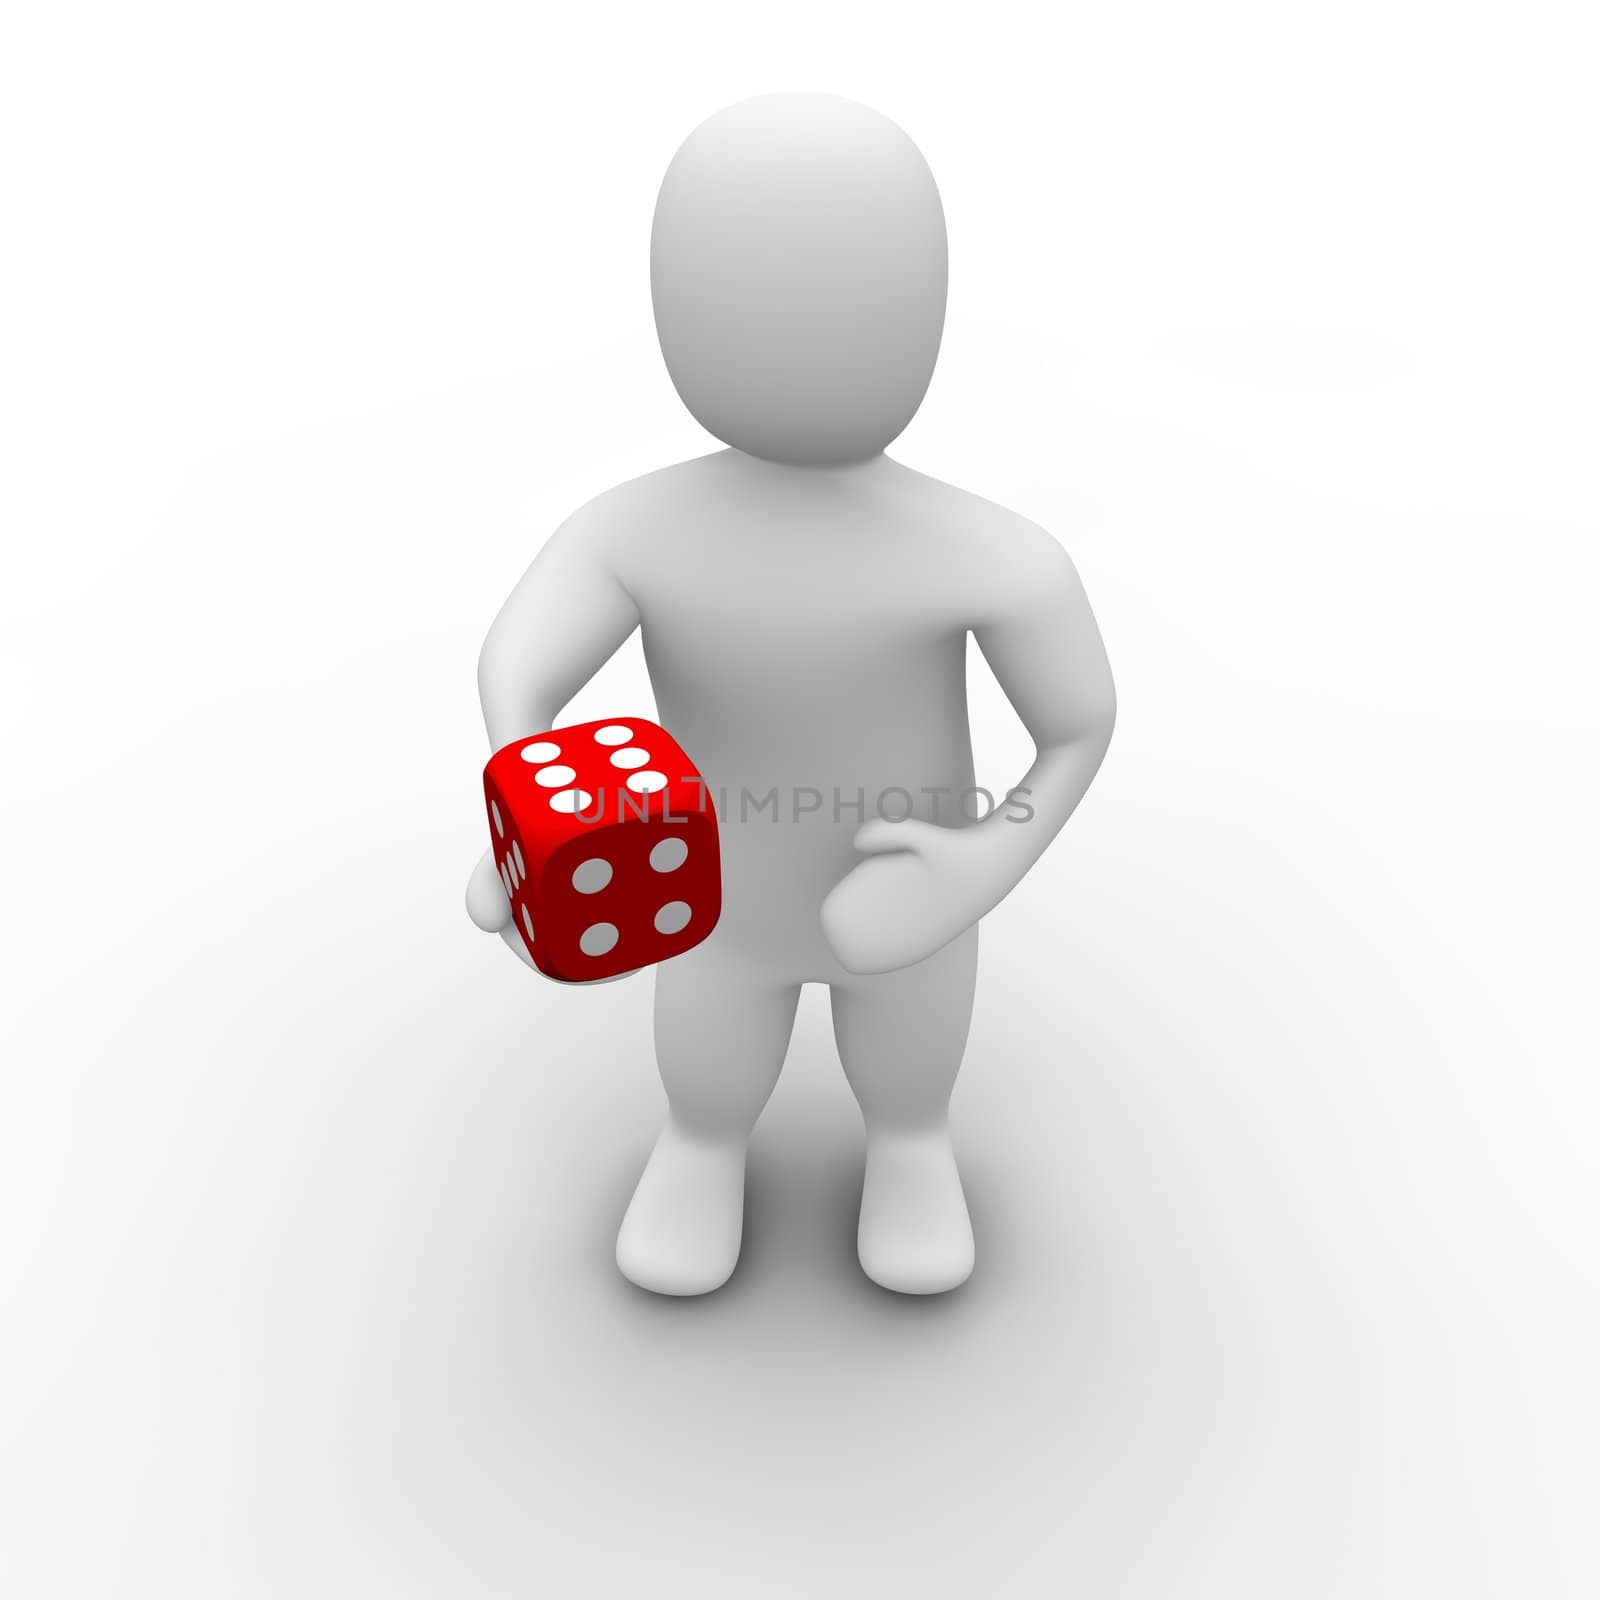 Man giving red dice with six on top. 3d rendered illustration.